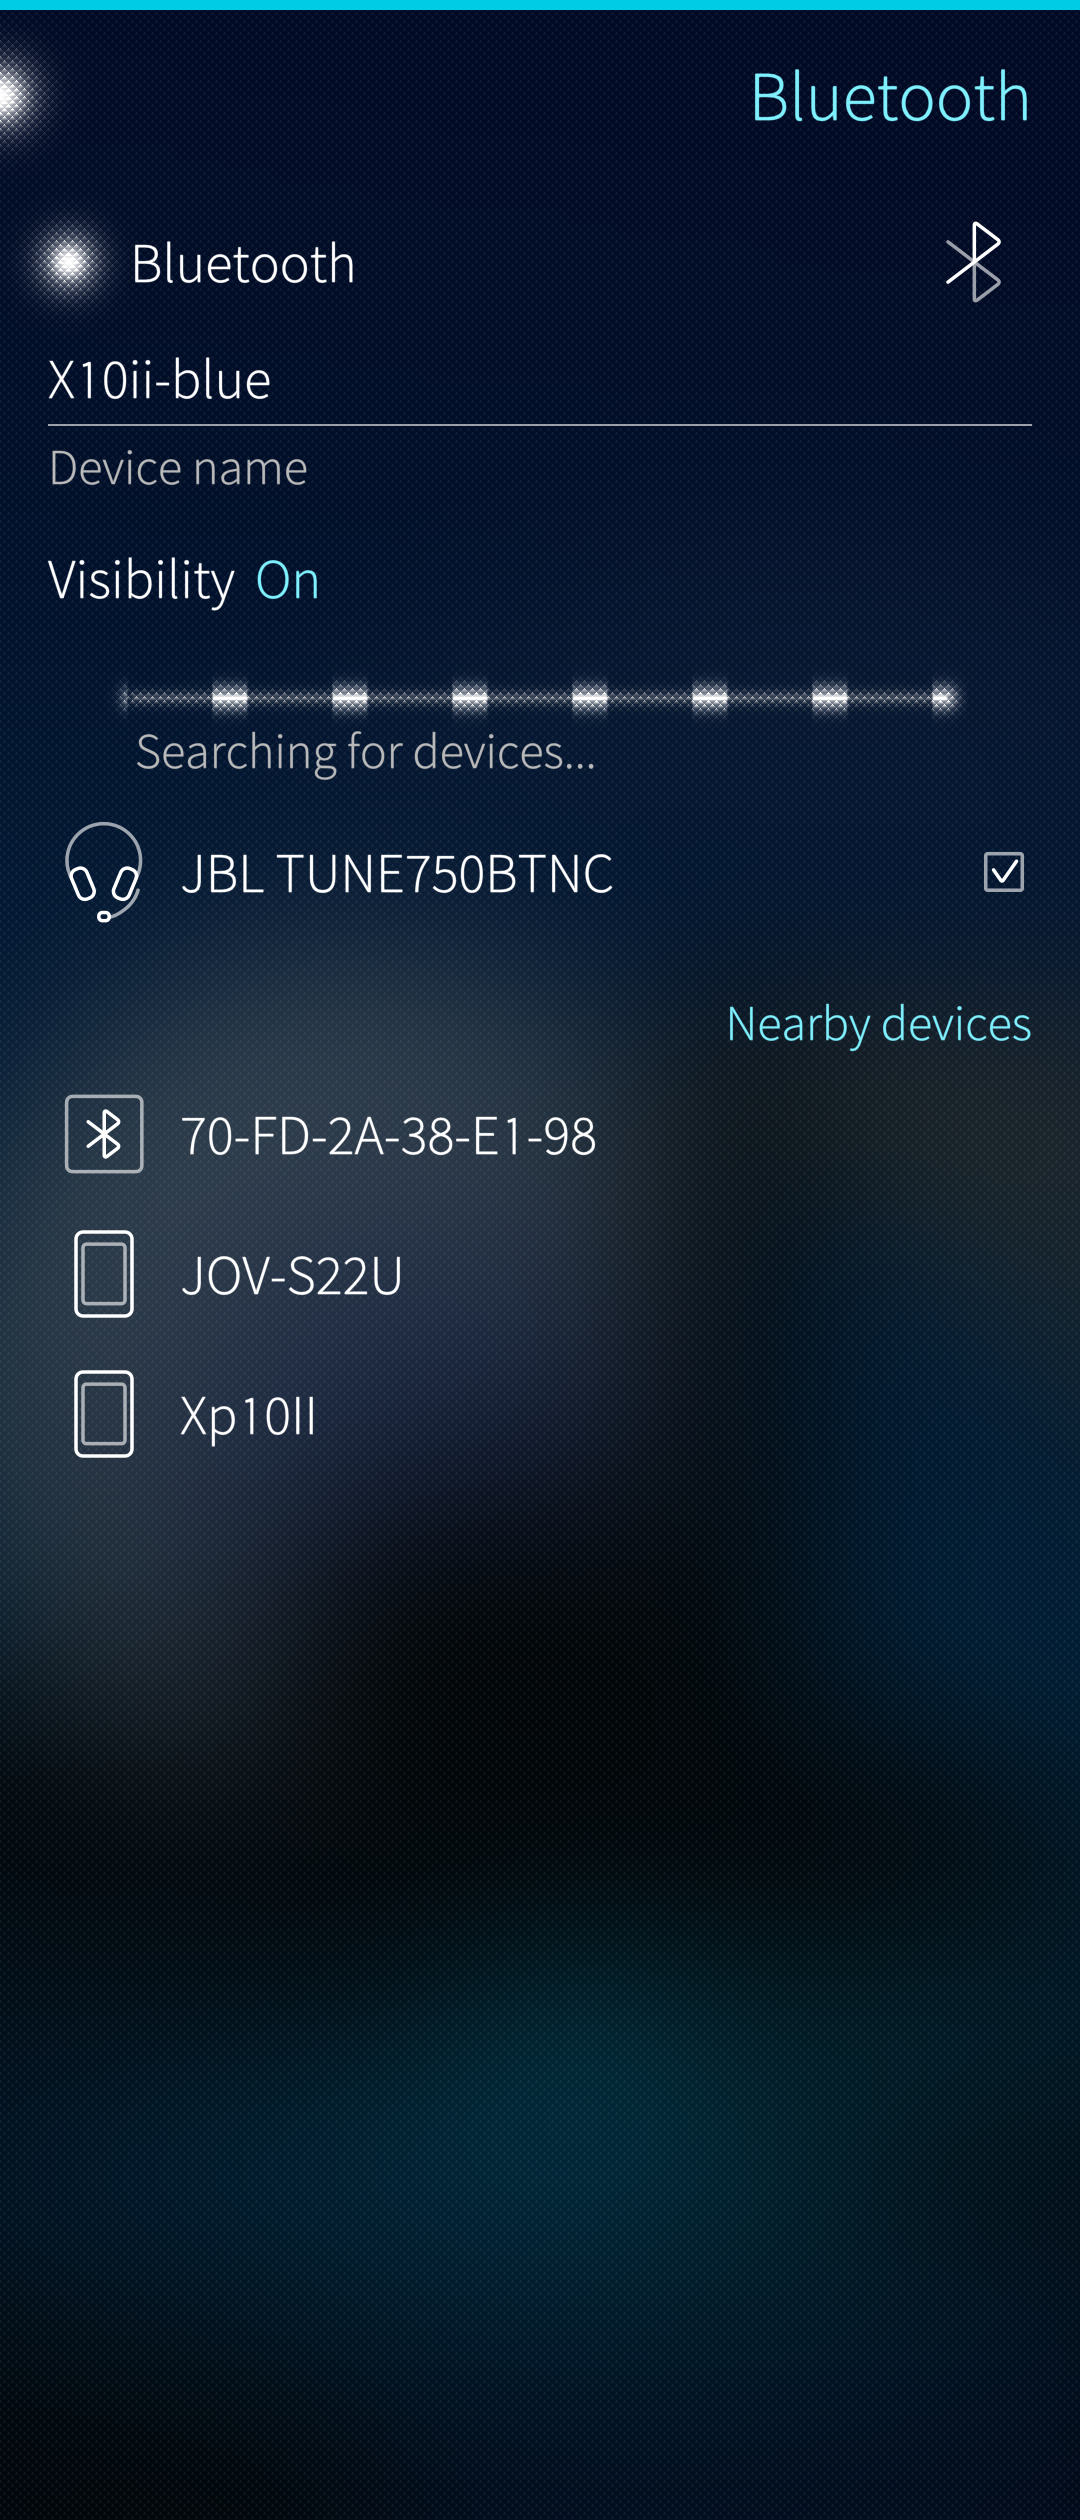 Searching for devices